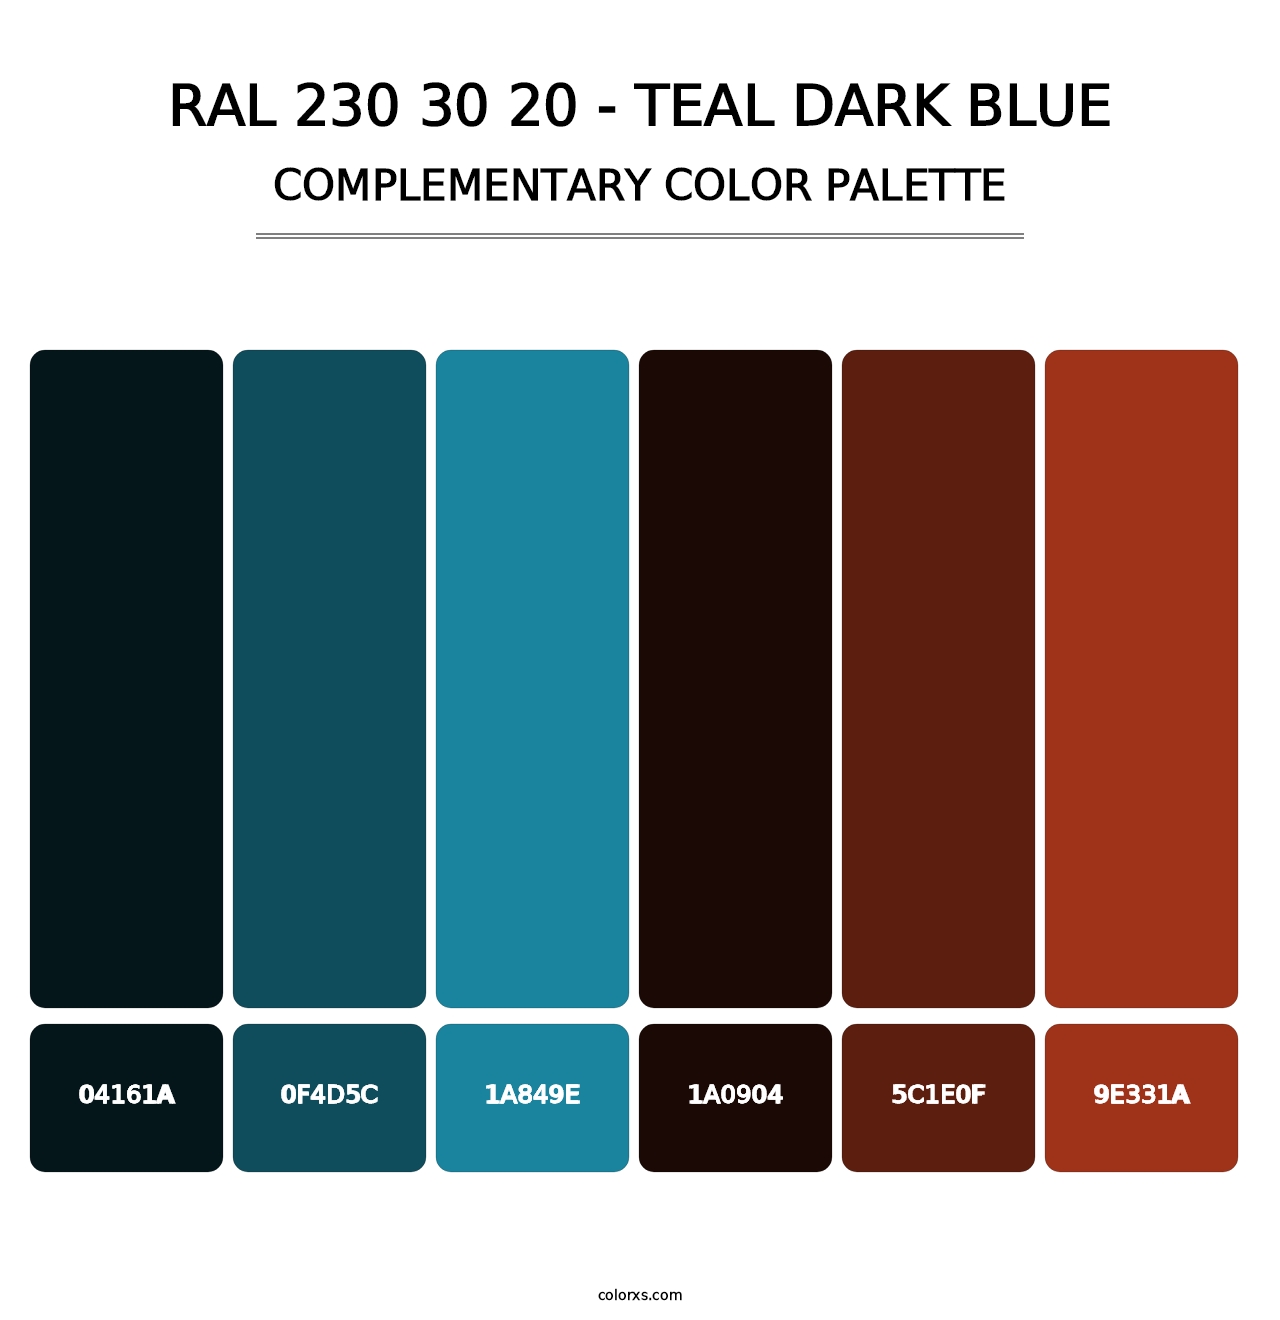 RAL 230 30 20 - Teal Dark Blue - Complementary Color Palette